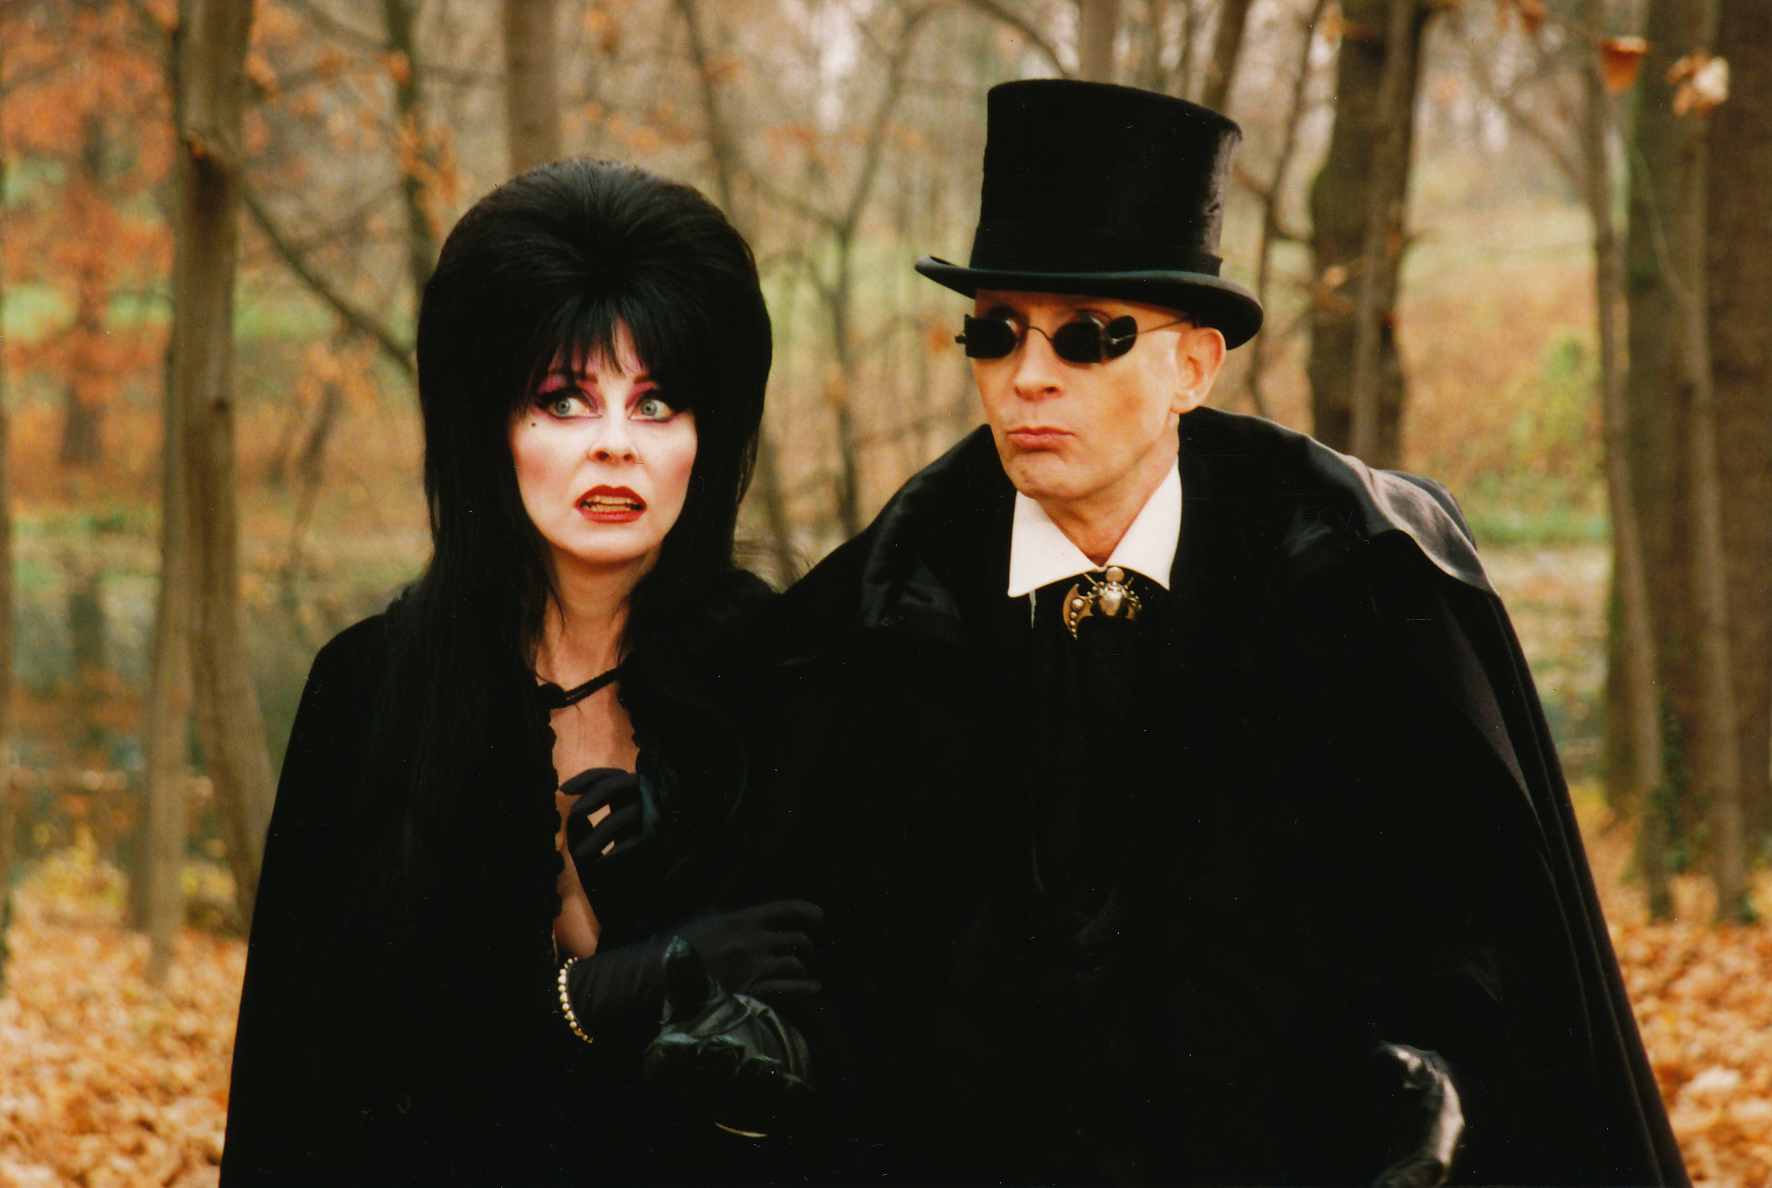 Elvira with Lord Hellsubus from 